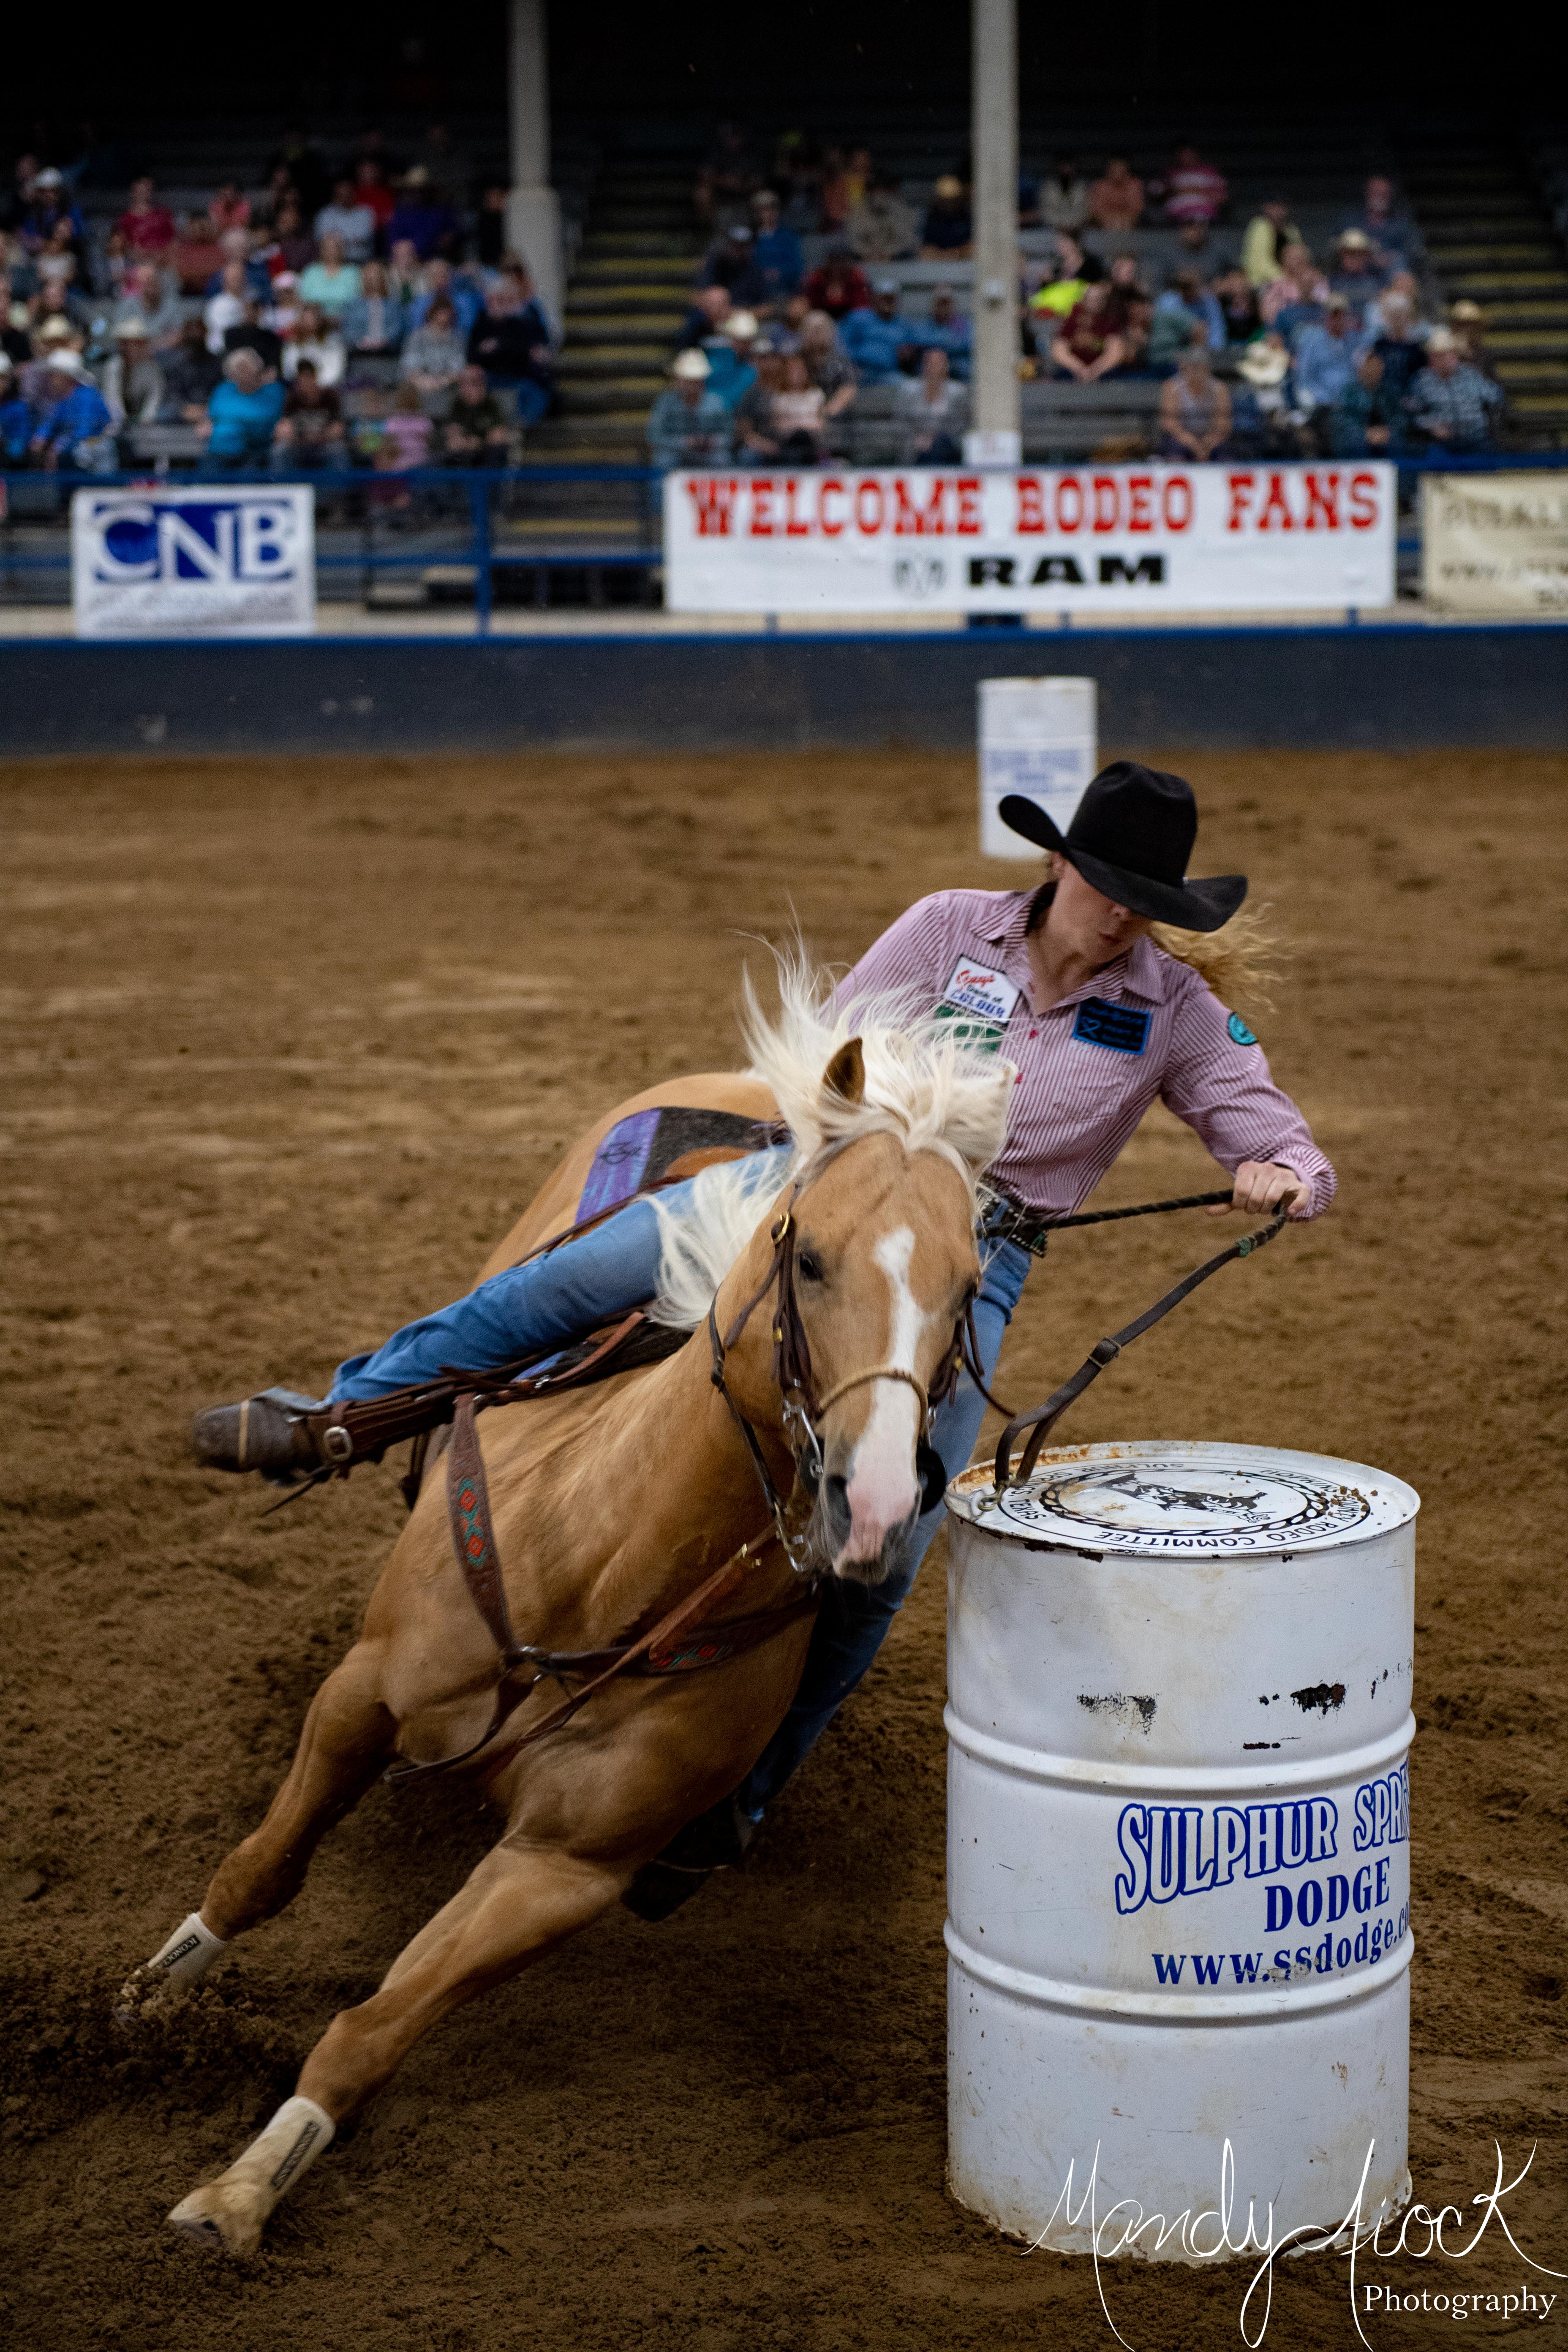 Photos from Last Weekend’s 2019 Sulphur Springs Dodge UPRA Rodeo by Mandy Fiock Photography!